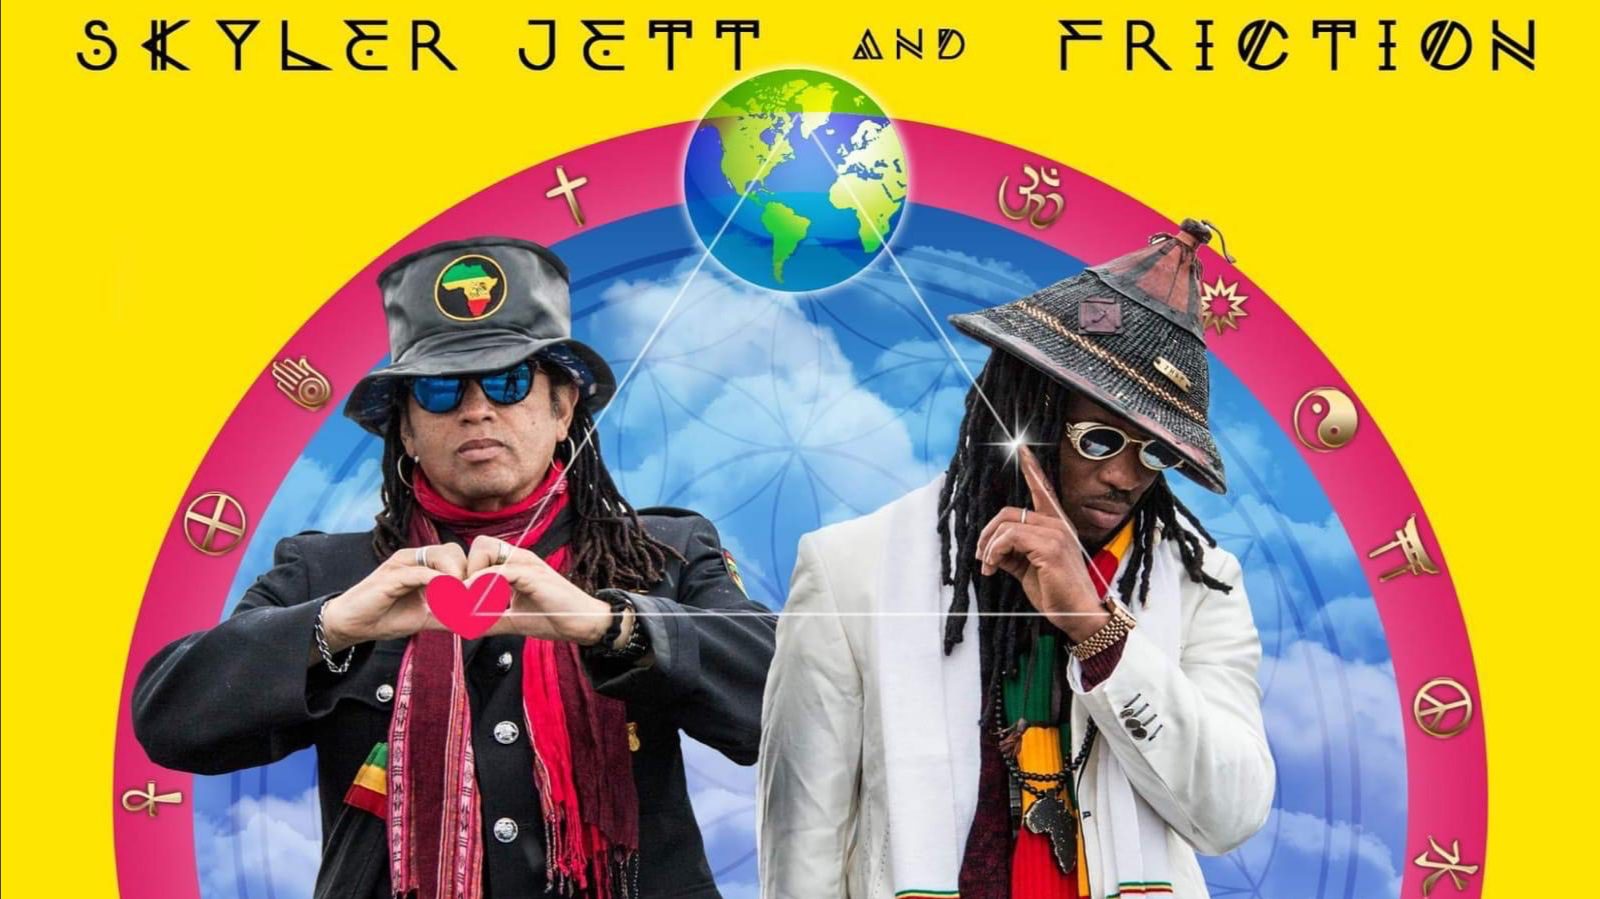 The Global Messengers (Friction & Skyler Jett) Drop Official Video For “ONE WORLD”.